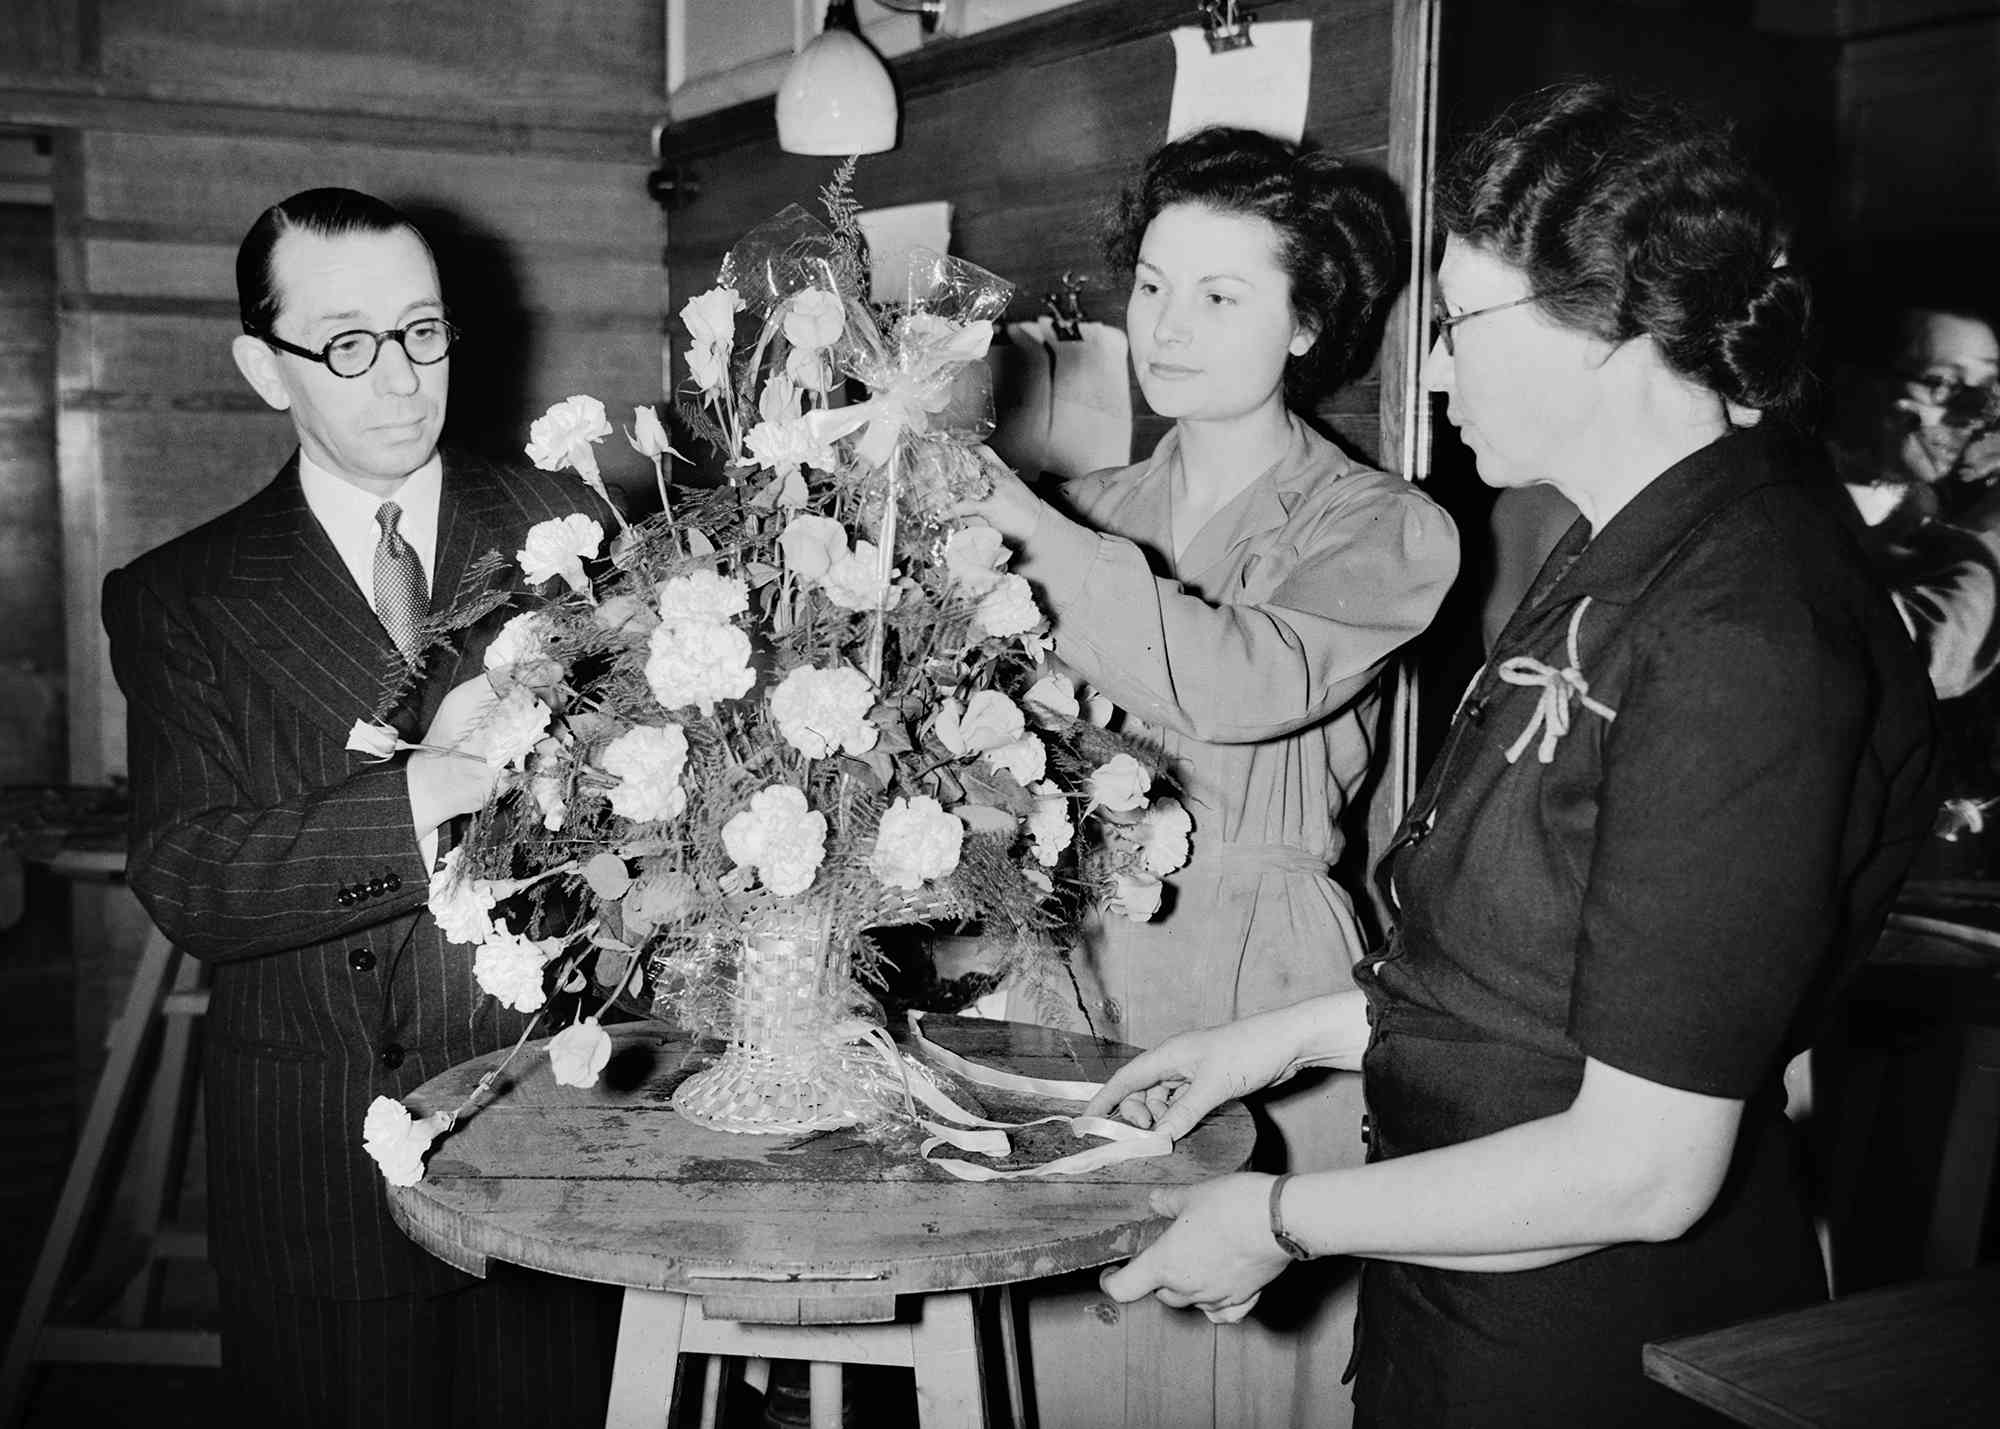 Florist Martin Longman, of Fenchurch Street, who has been appointed to make Princess Elizabeth's bouquet for her wedding to Prince Philip, at work with his assistants Mary Nelson and Constance Fears, 5th November 1947. He is keeping the design a secret until the day of the wedding